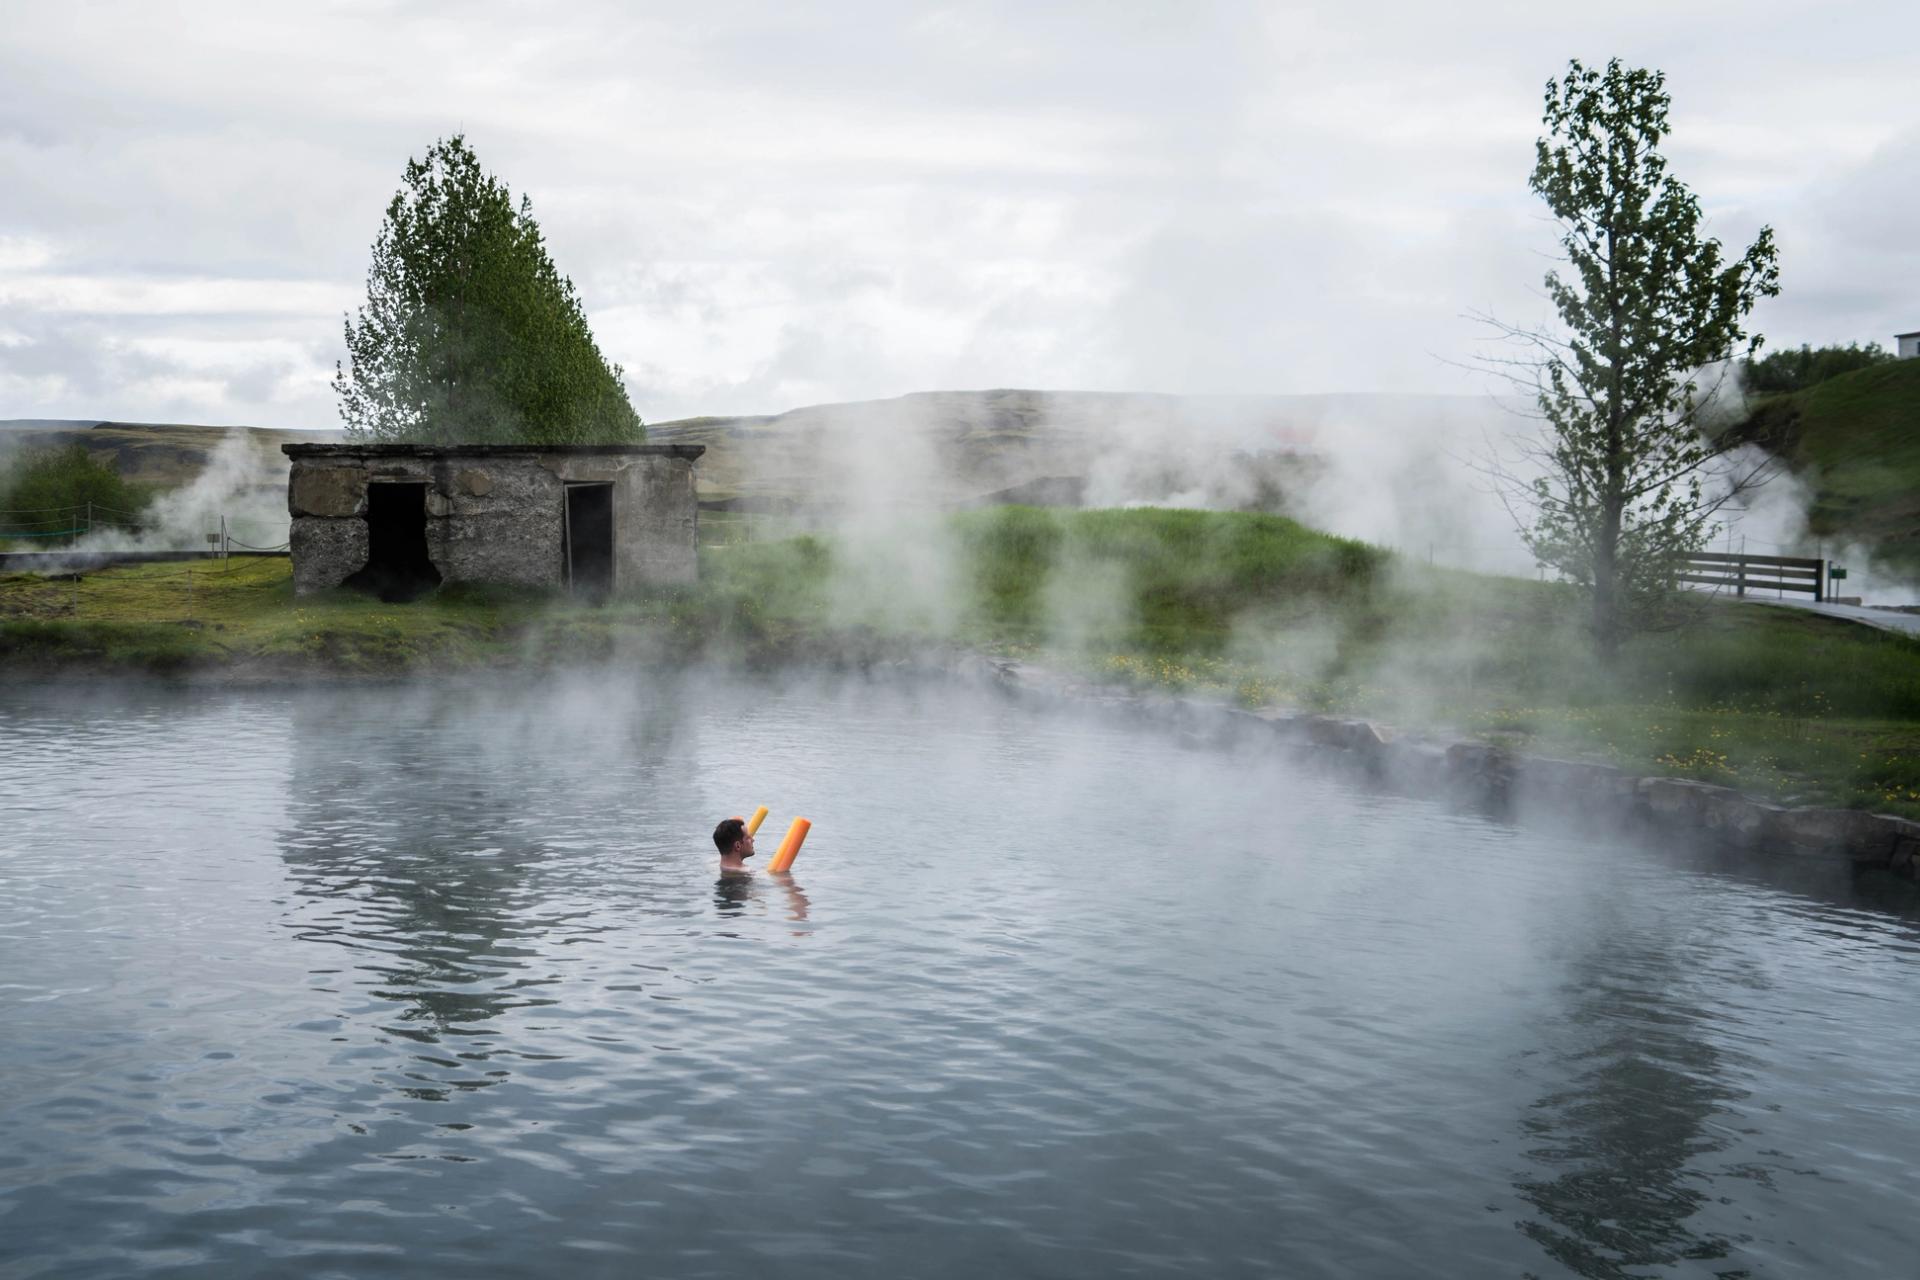 Secret lagoon, a hot spring located near the golden circle in Iceland